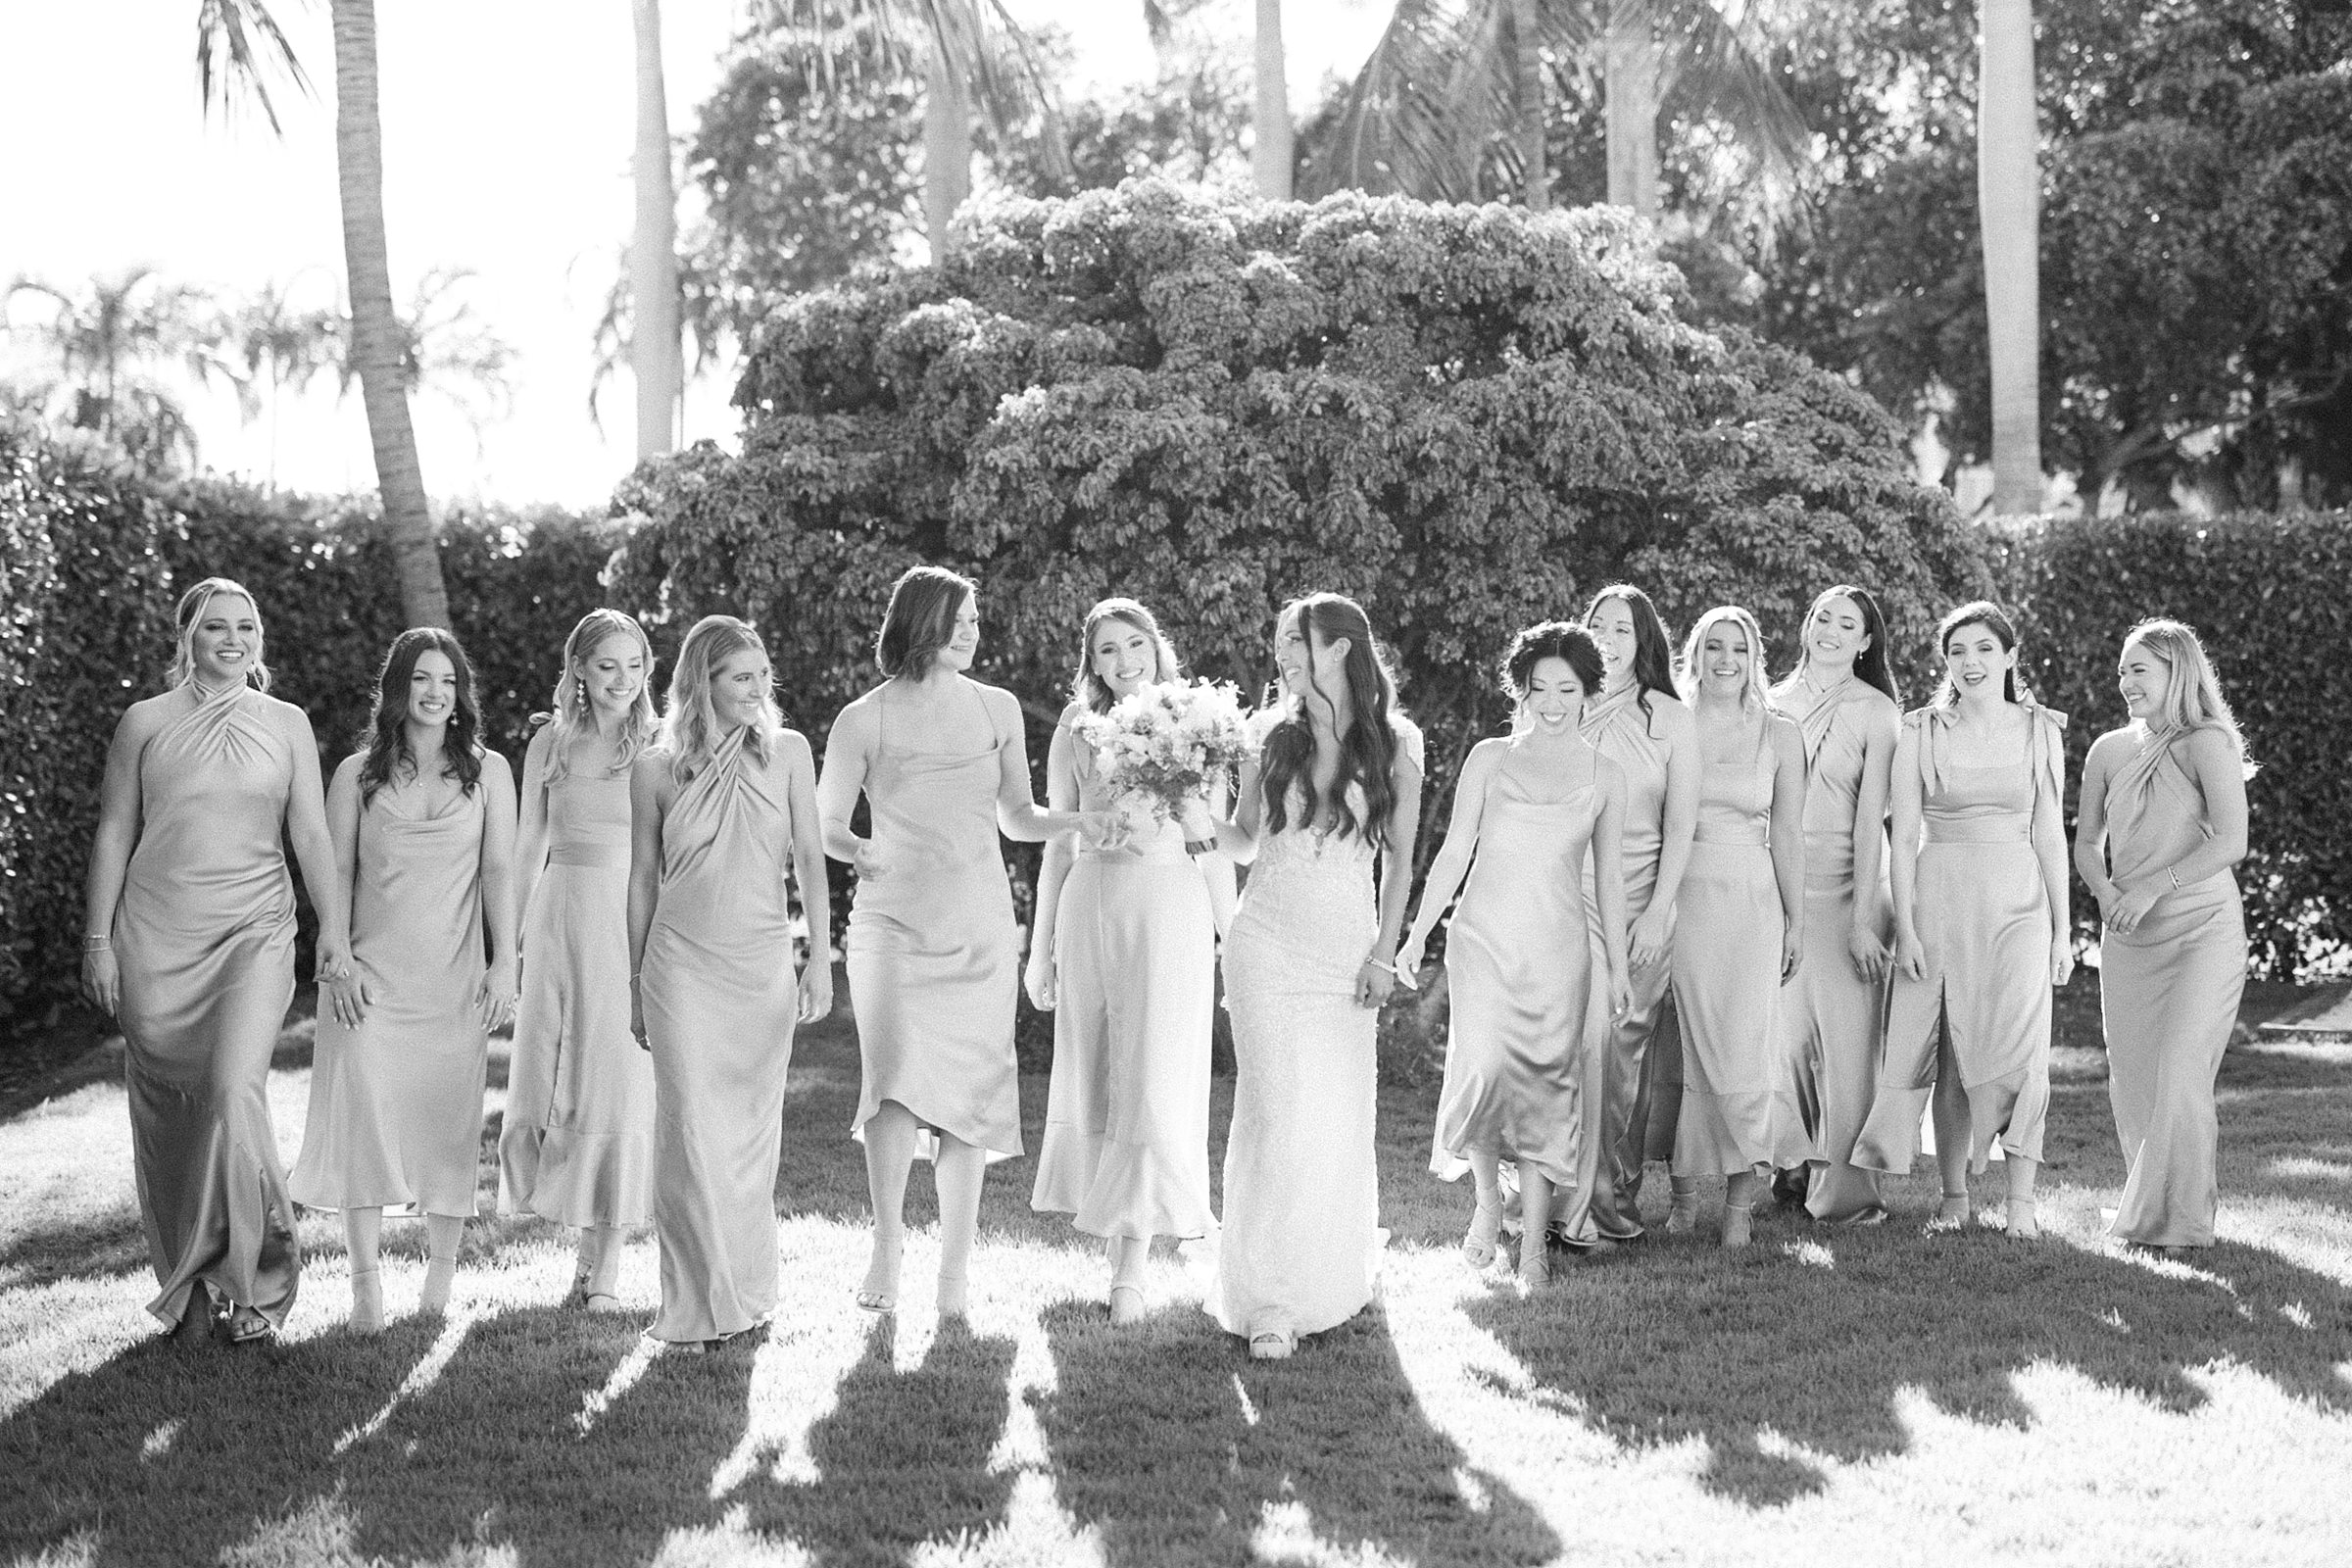 black and white group photo of the elegant bridesmaids walking down the lawn with the bride in the center